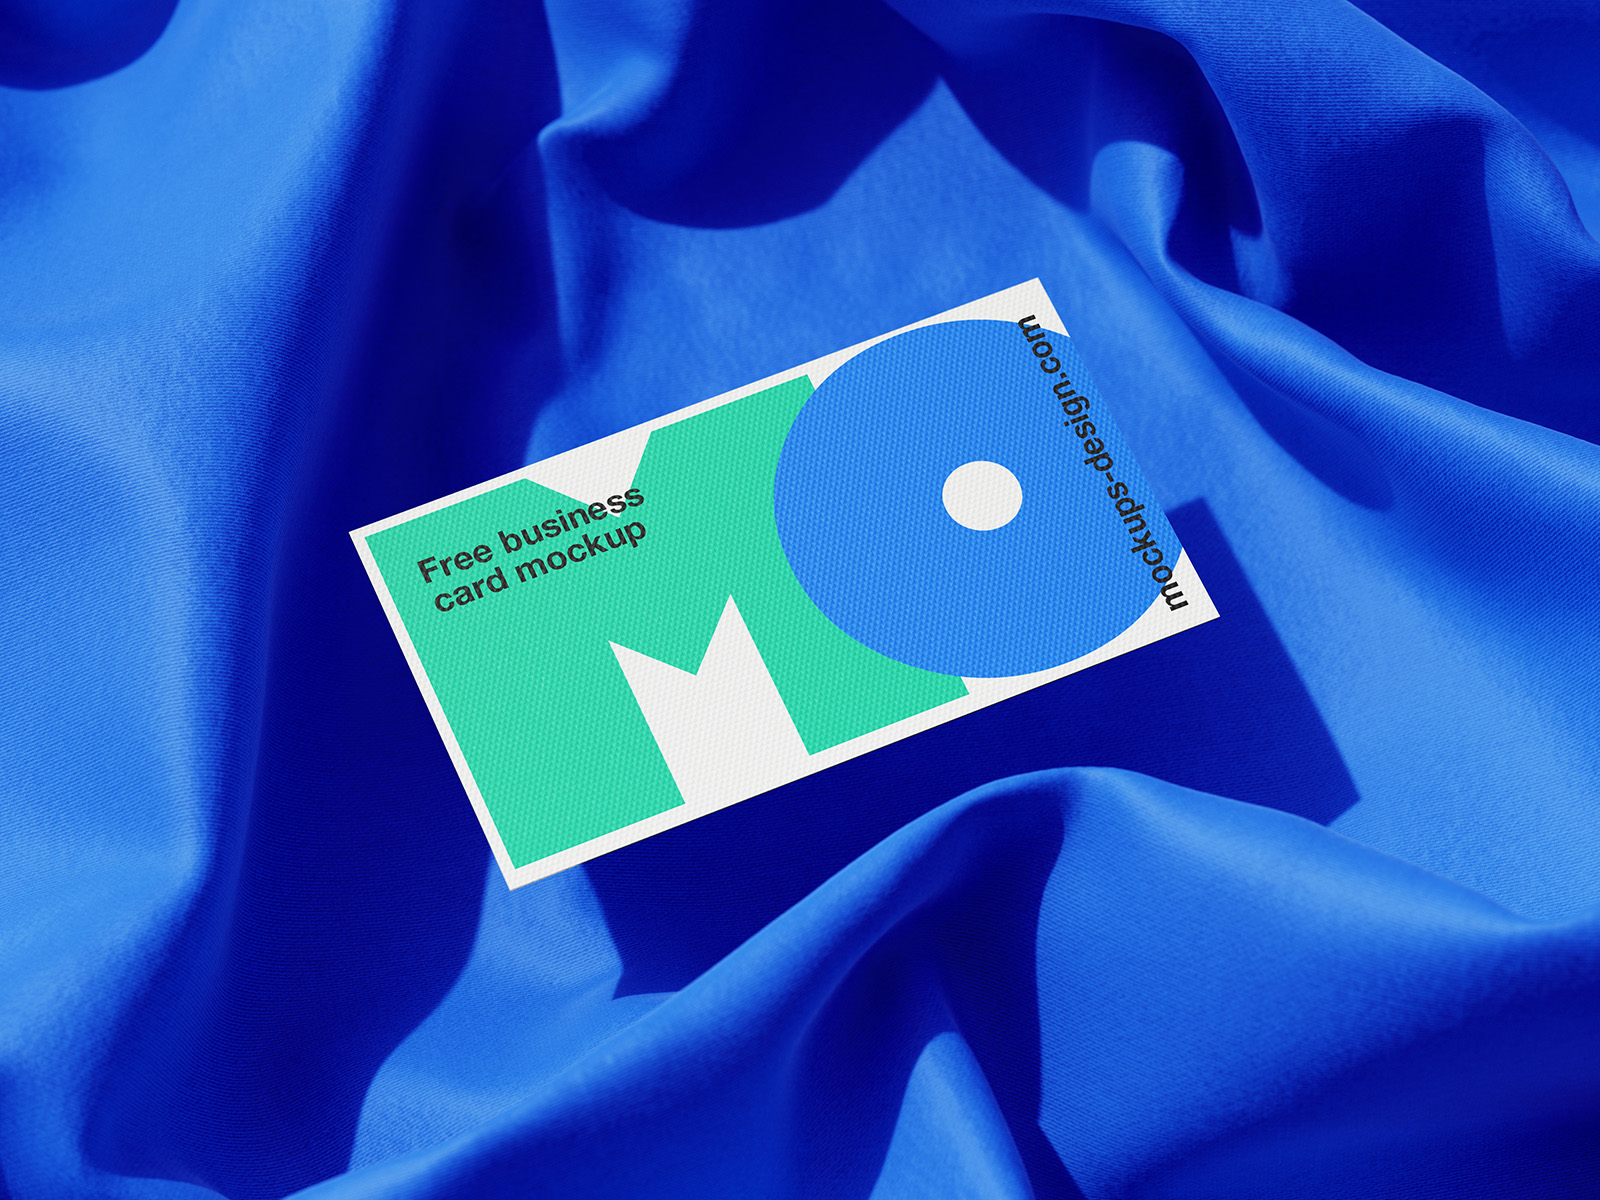 Business cards lying on a fabric mockup